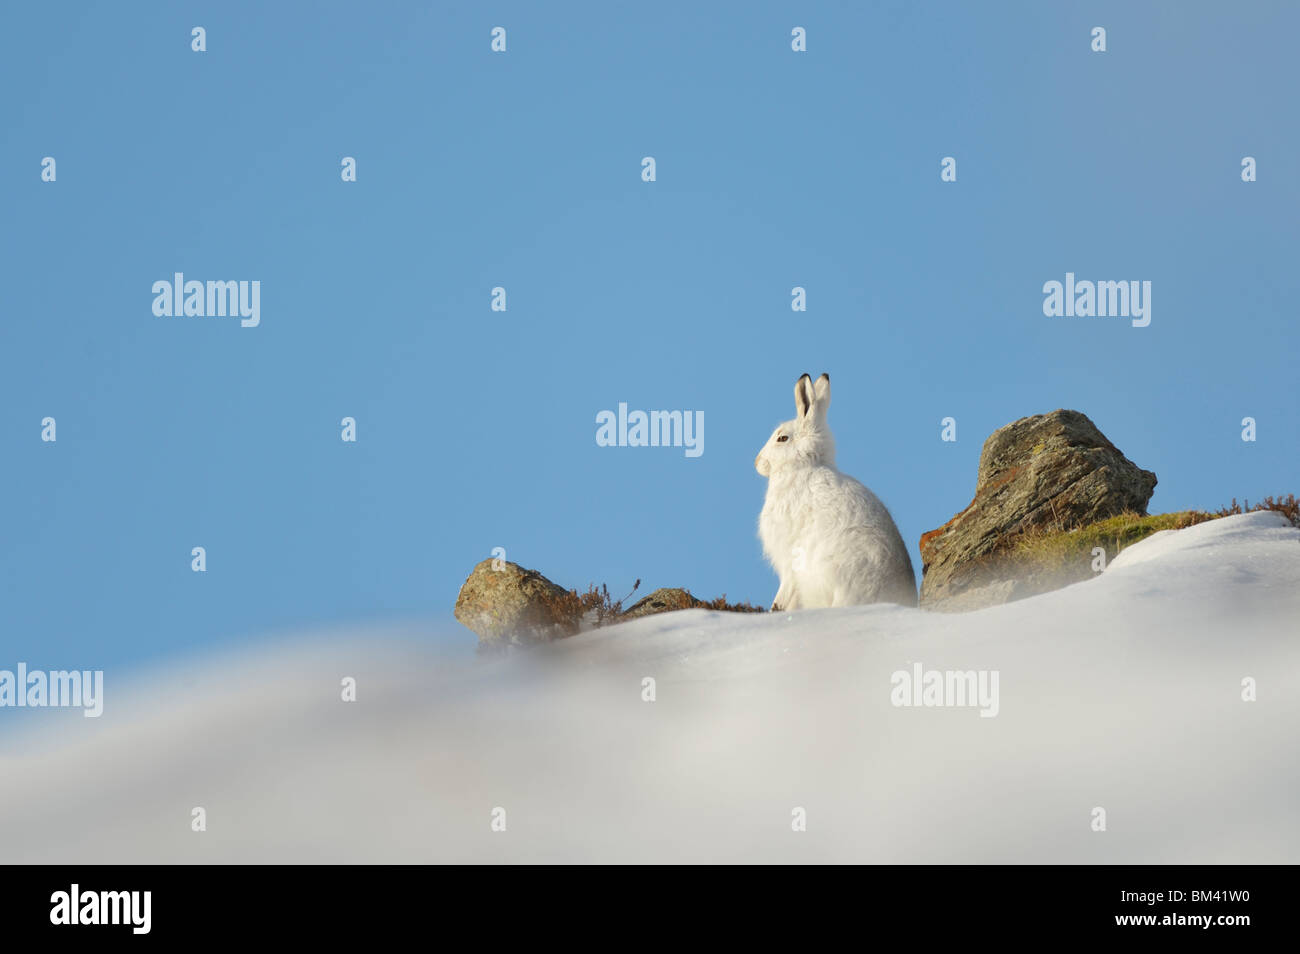 Mountain Hare (Lepus timidus) in winter pelage (coat) resting on a snowy hillside, Cairngorms, Scotland. Stock Photo